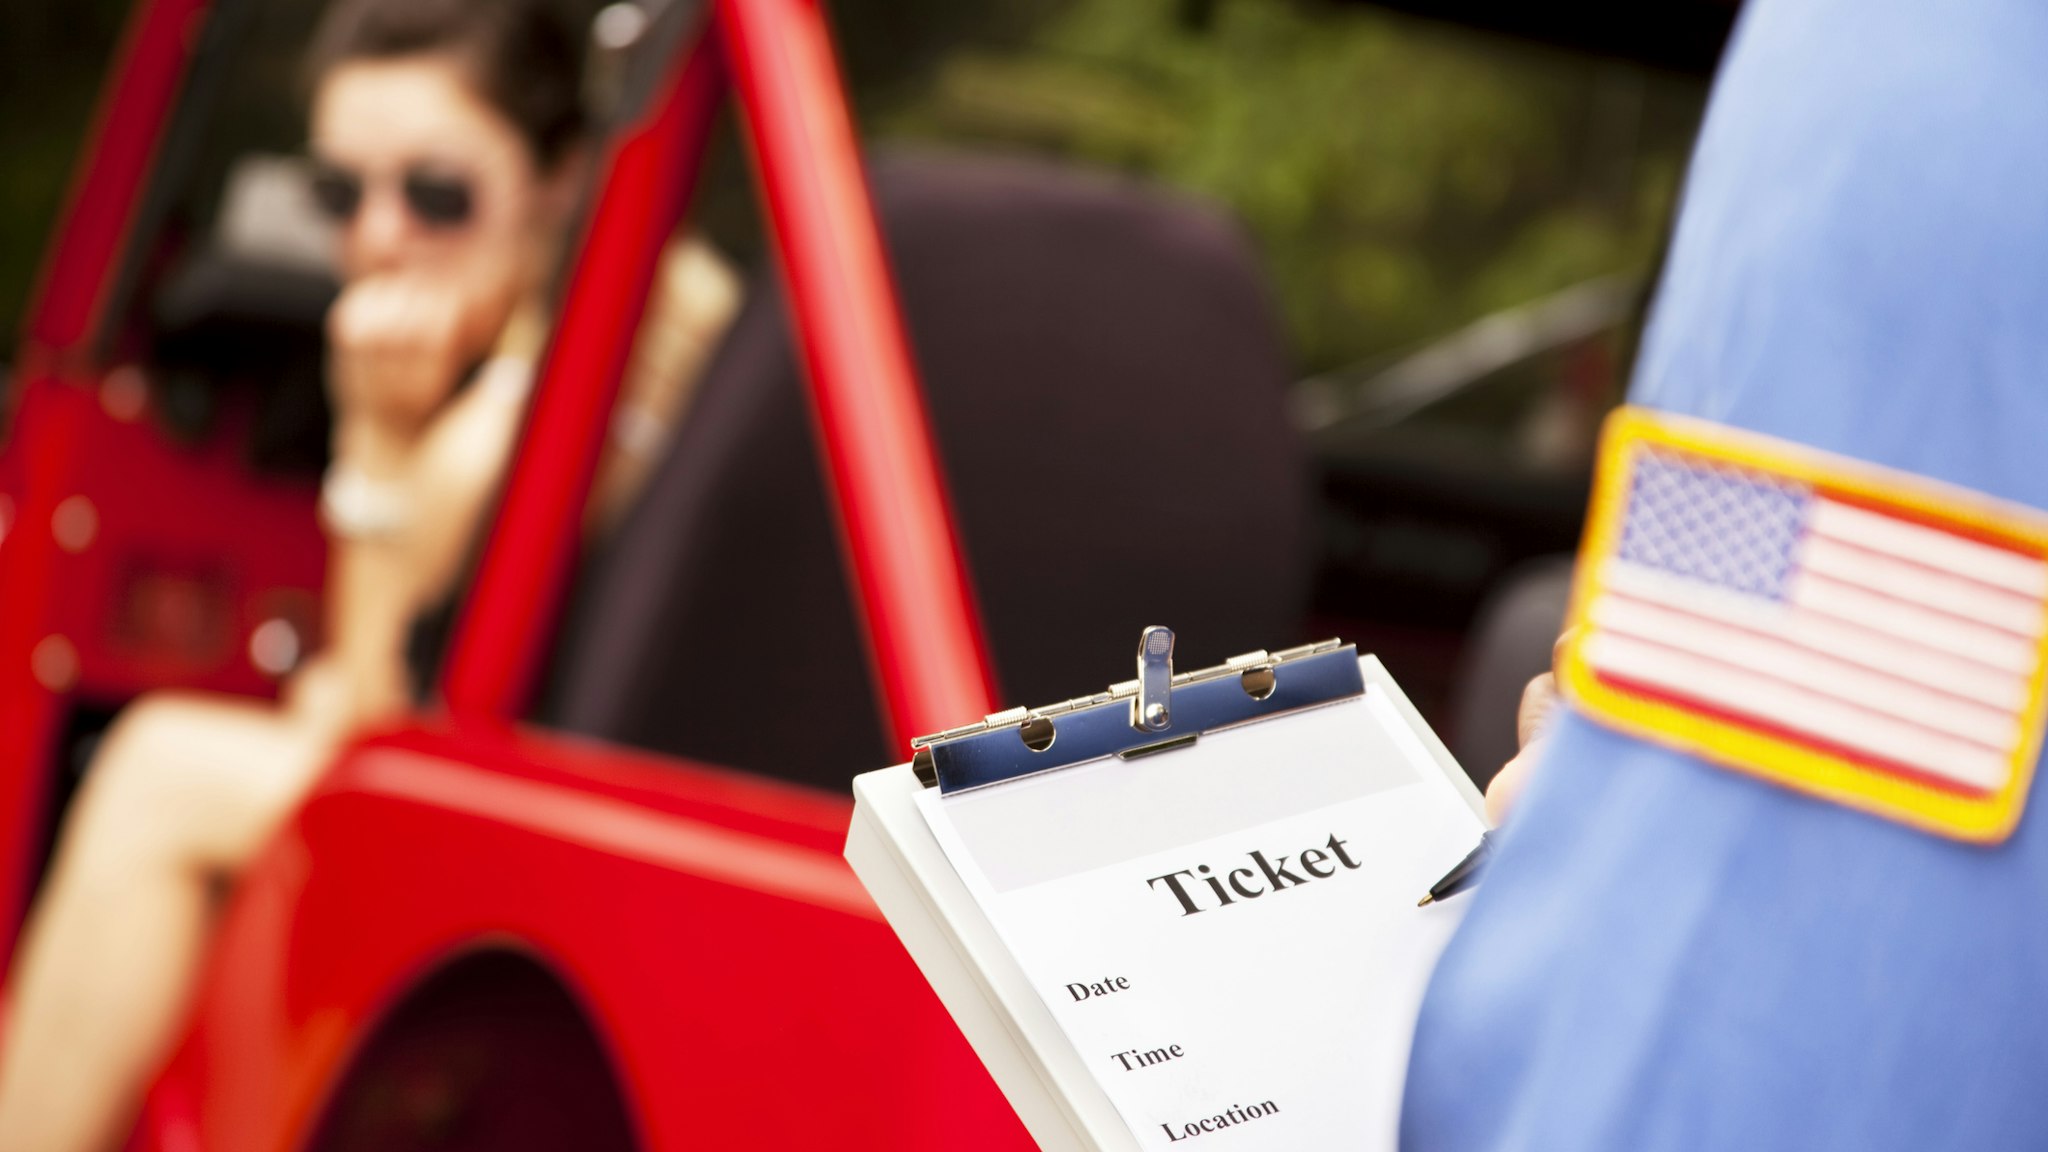 Female driver in red vehicle getting traffic ticket from policeman. - stock photo